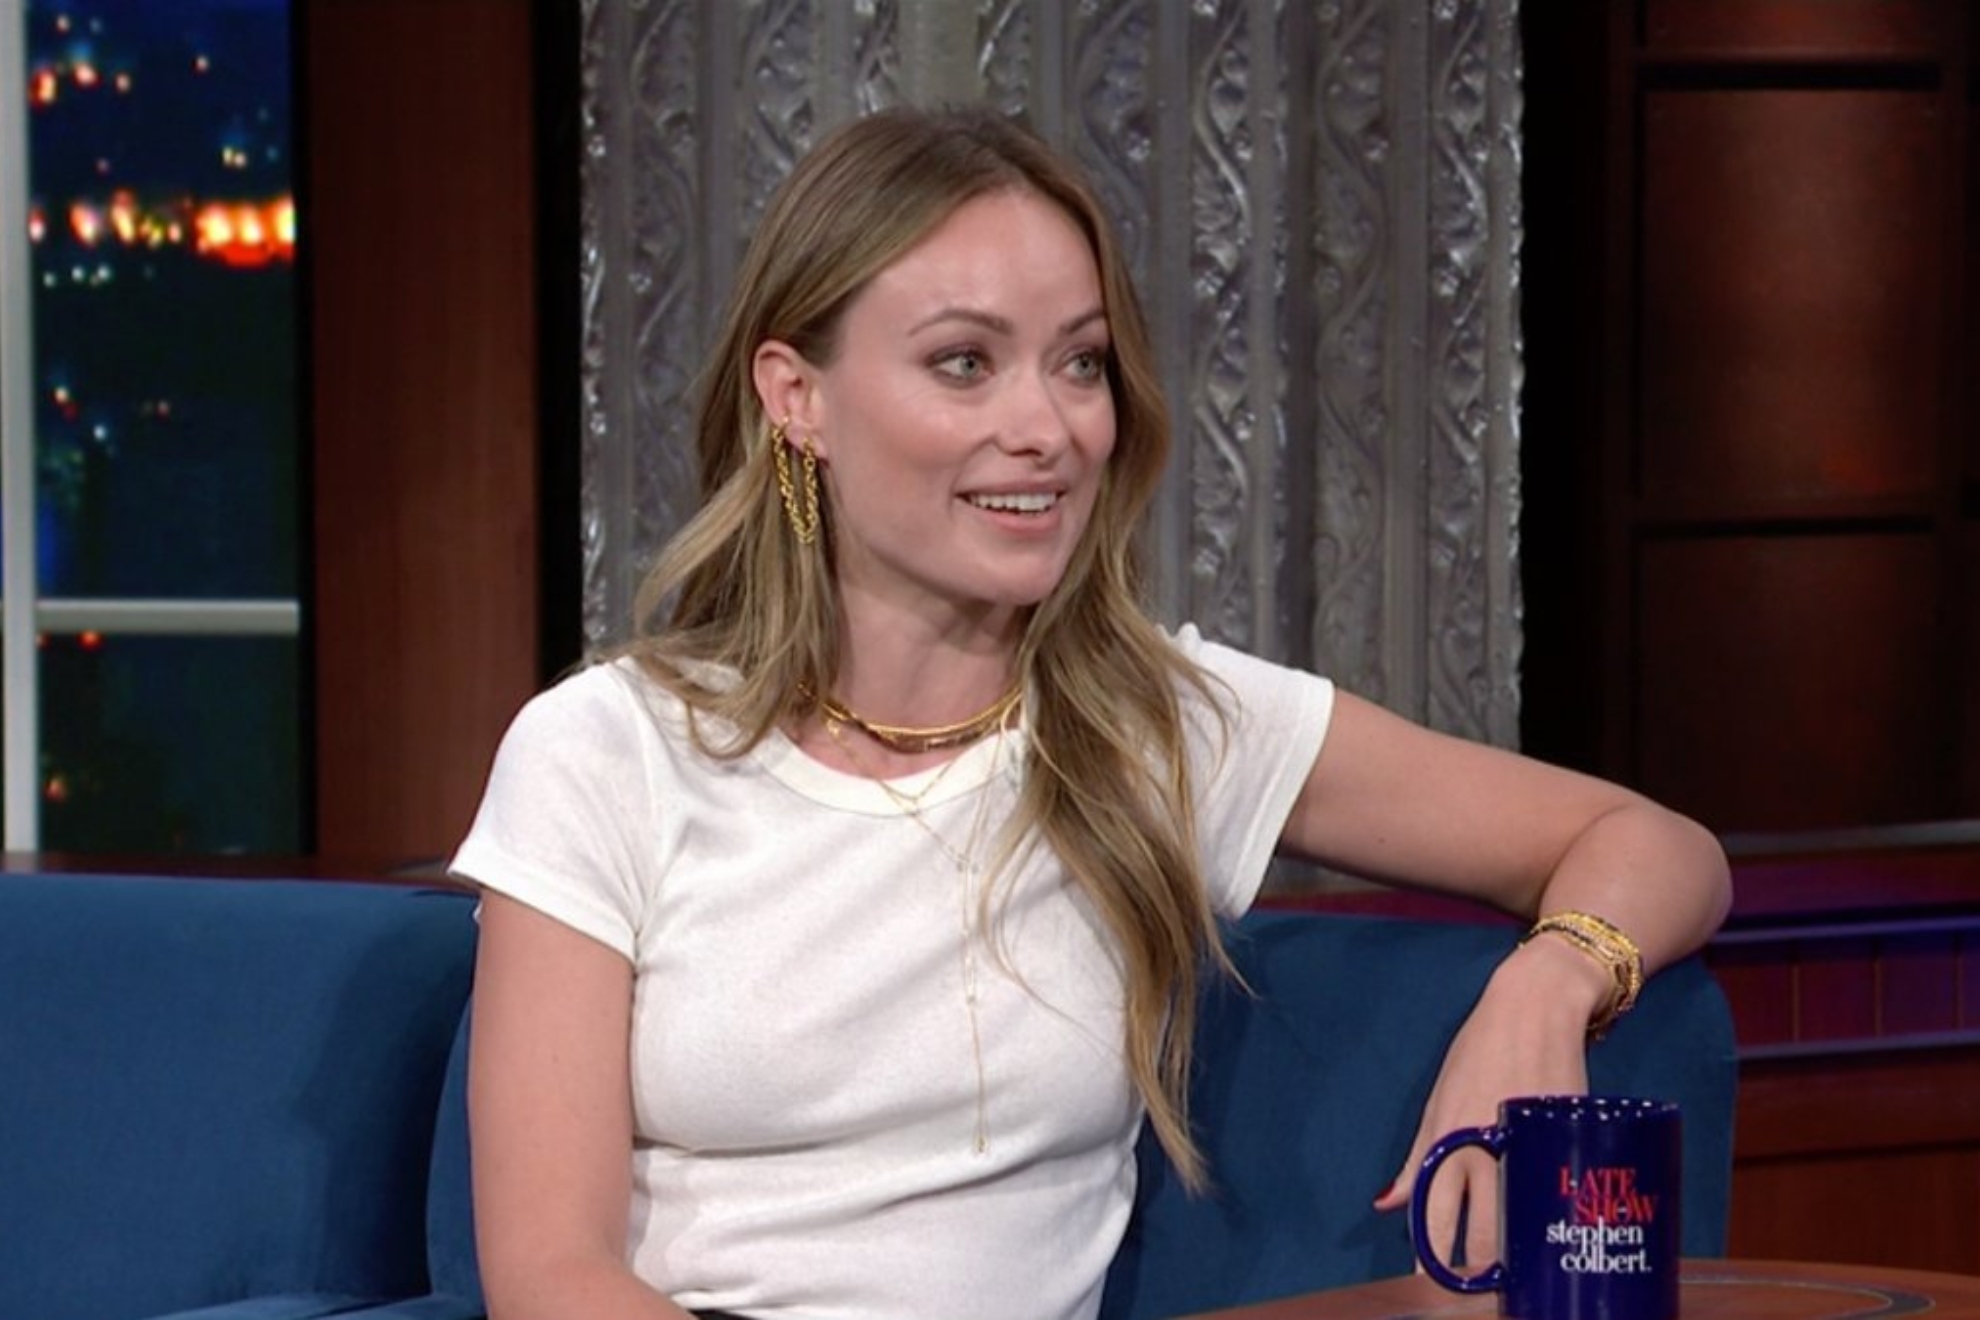 Olivia Wilde at 'The Late Show' - Twitter